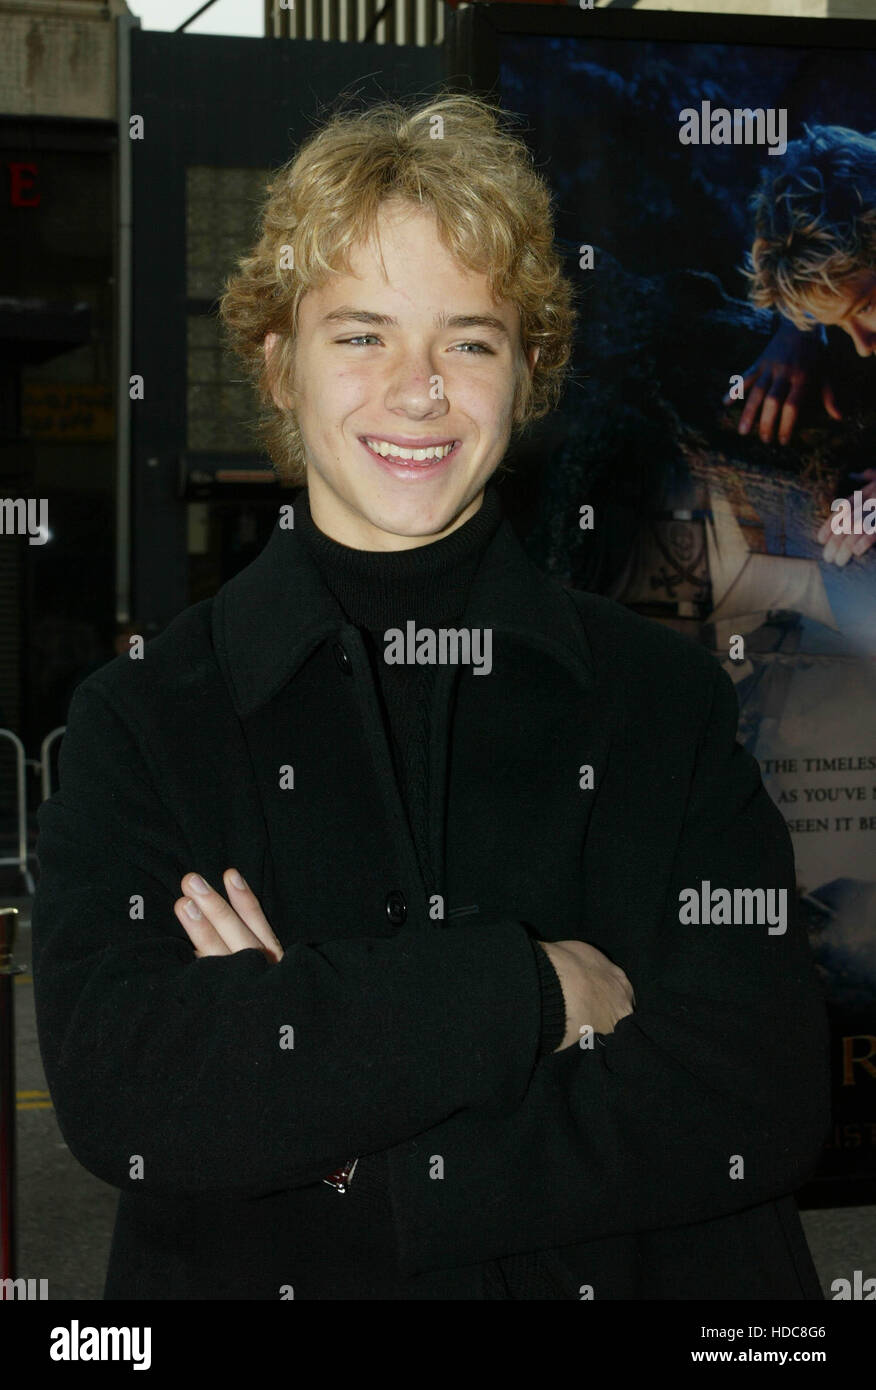 Jeremy Sumpter at the premiere of Peter Pan at Grauman's Chinese theatre in  Los Angeles, Calif., Saturday, December 13, 2003.   Photo credit: Francis Specker Stock Photo